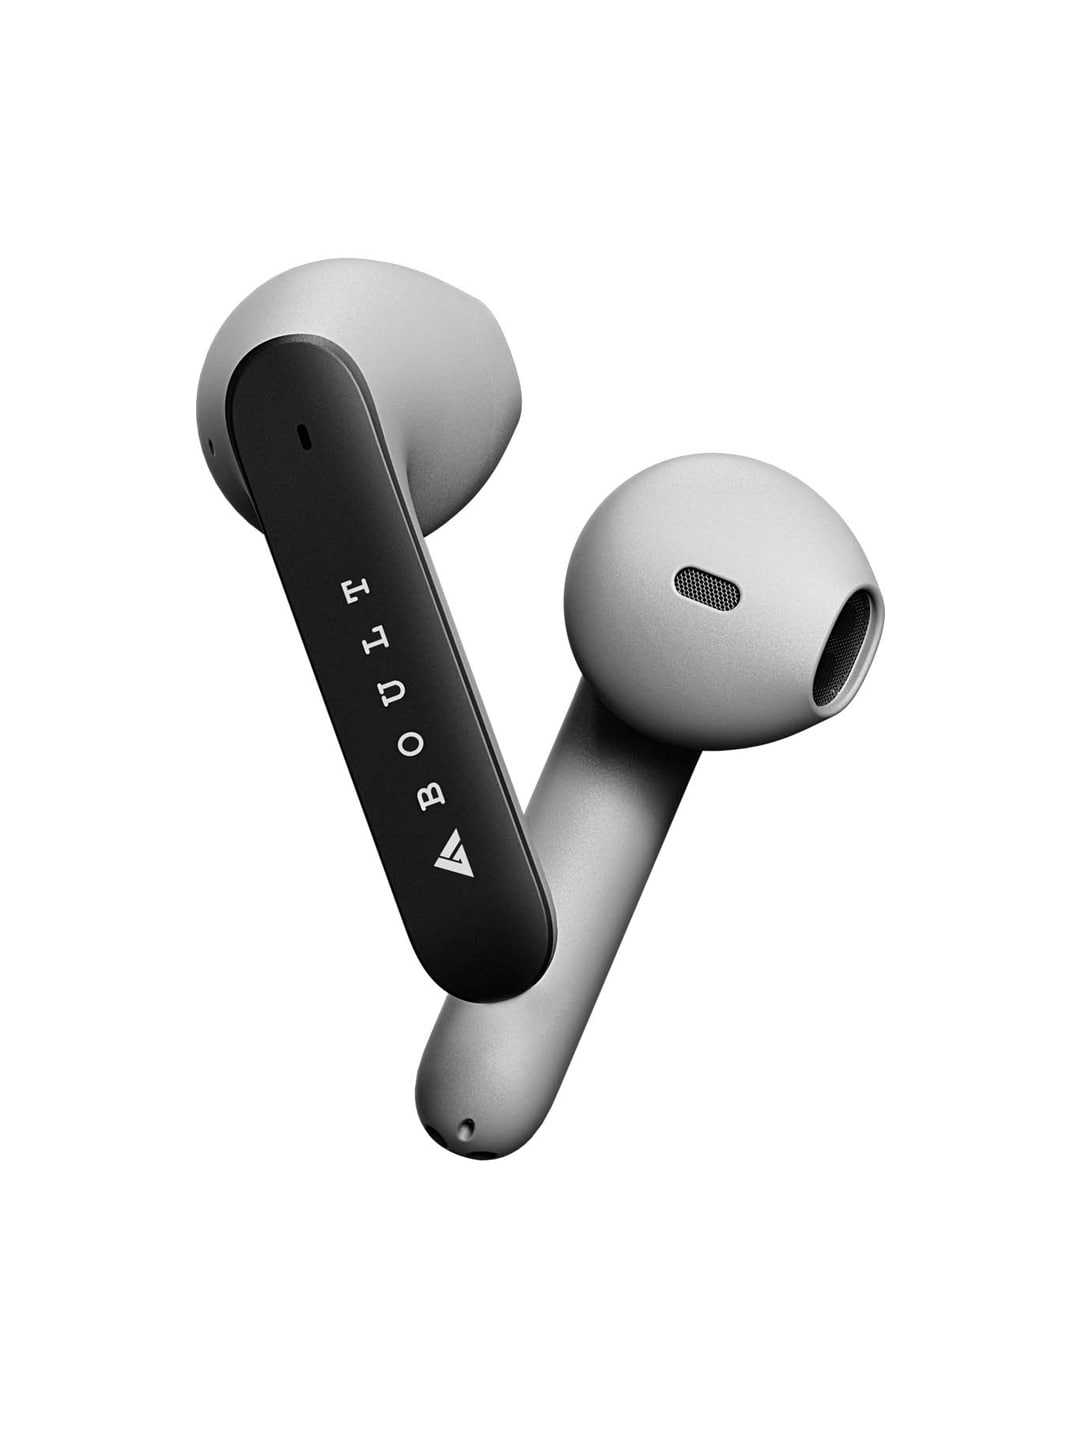 BOULT AUDIO AirBass Probuds True Wireless Bluetooth Earbuds - Black Price in India